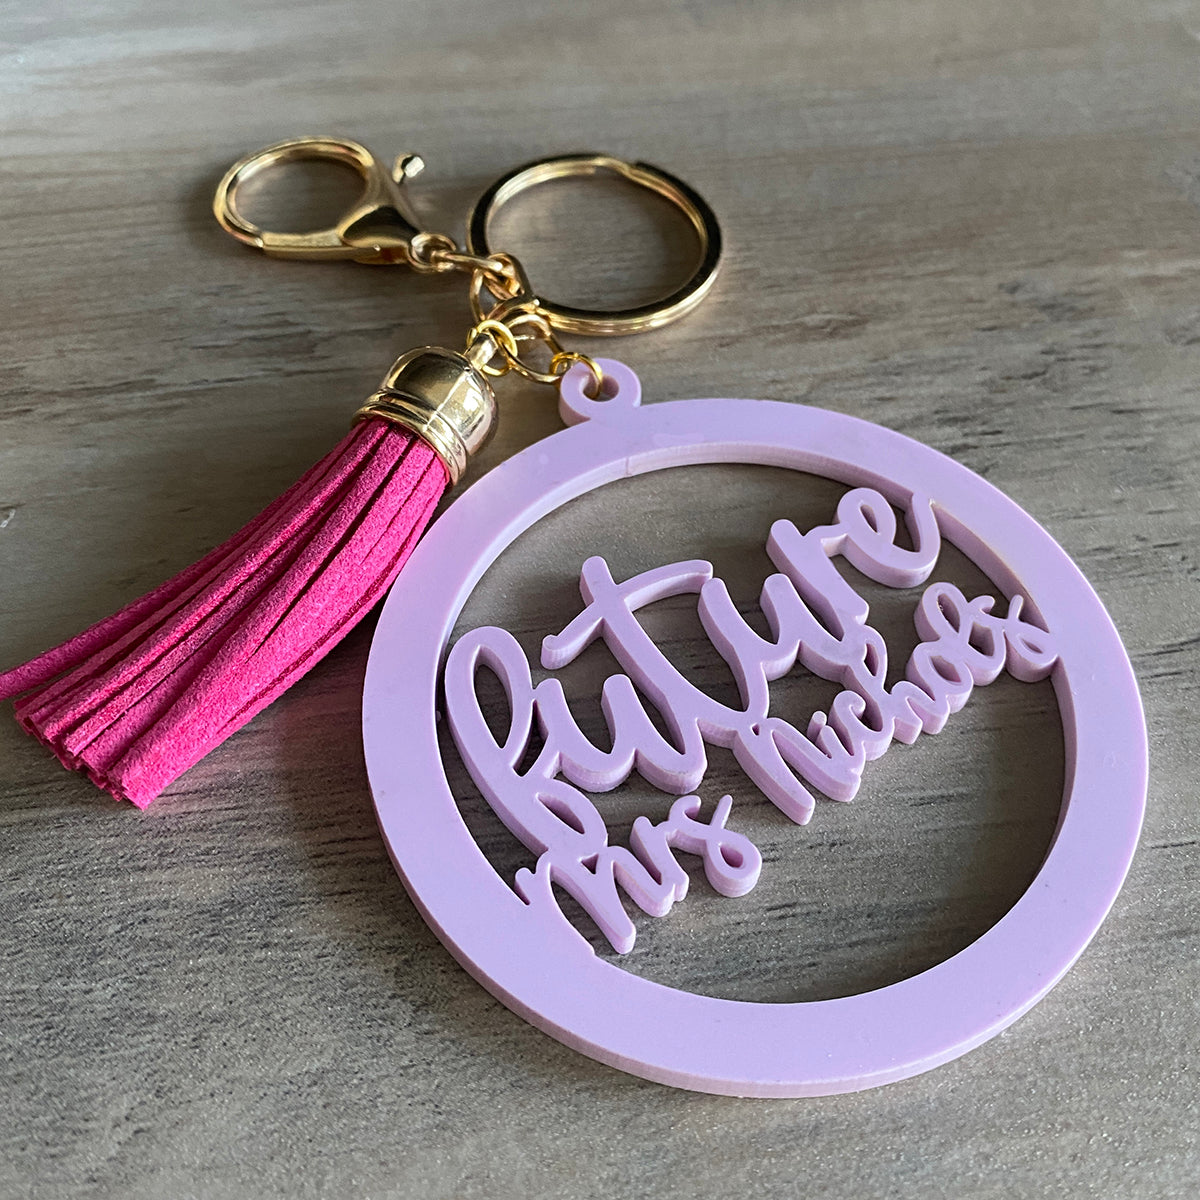 Future Mrs Cut-Out Keychain or Bag Charm